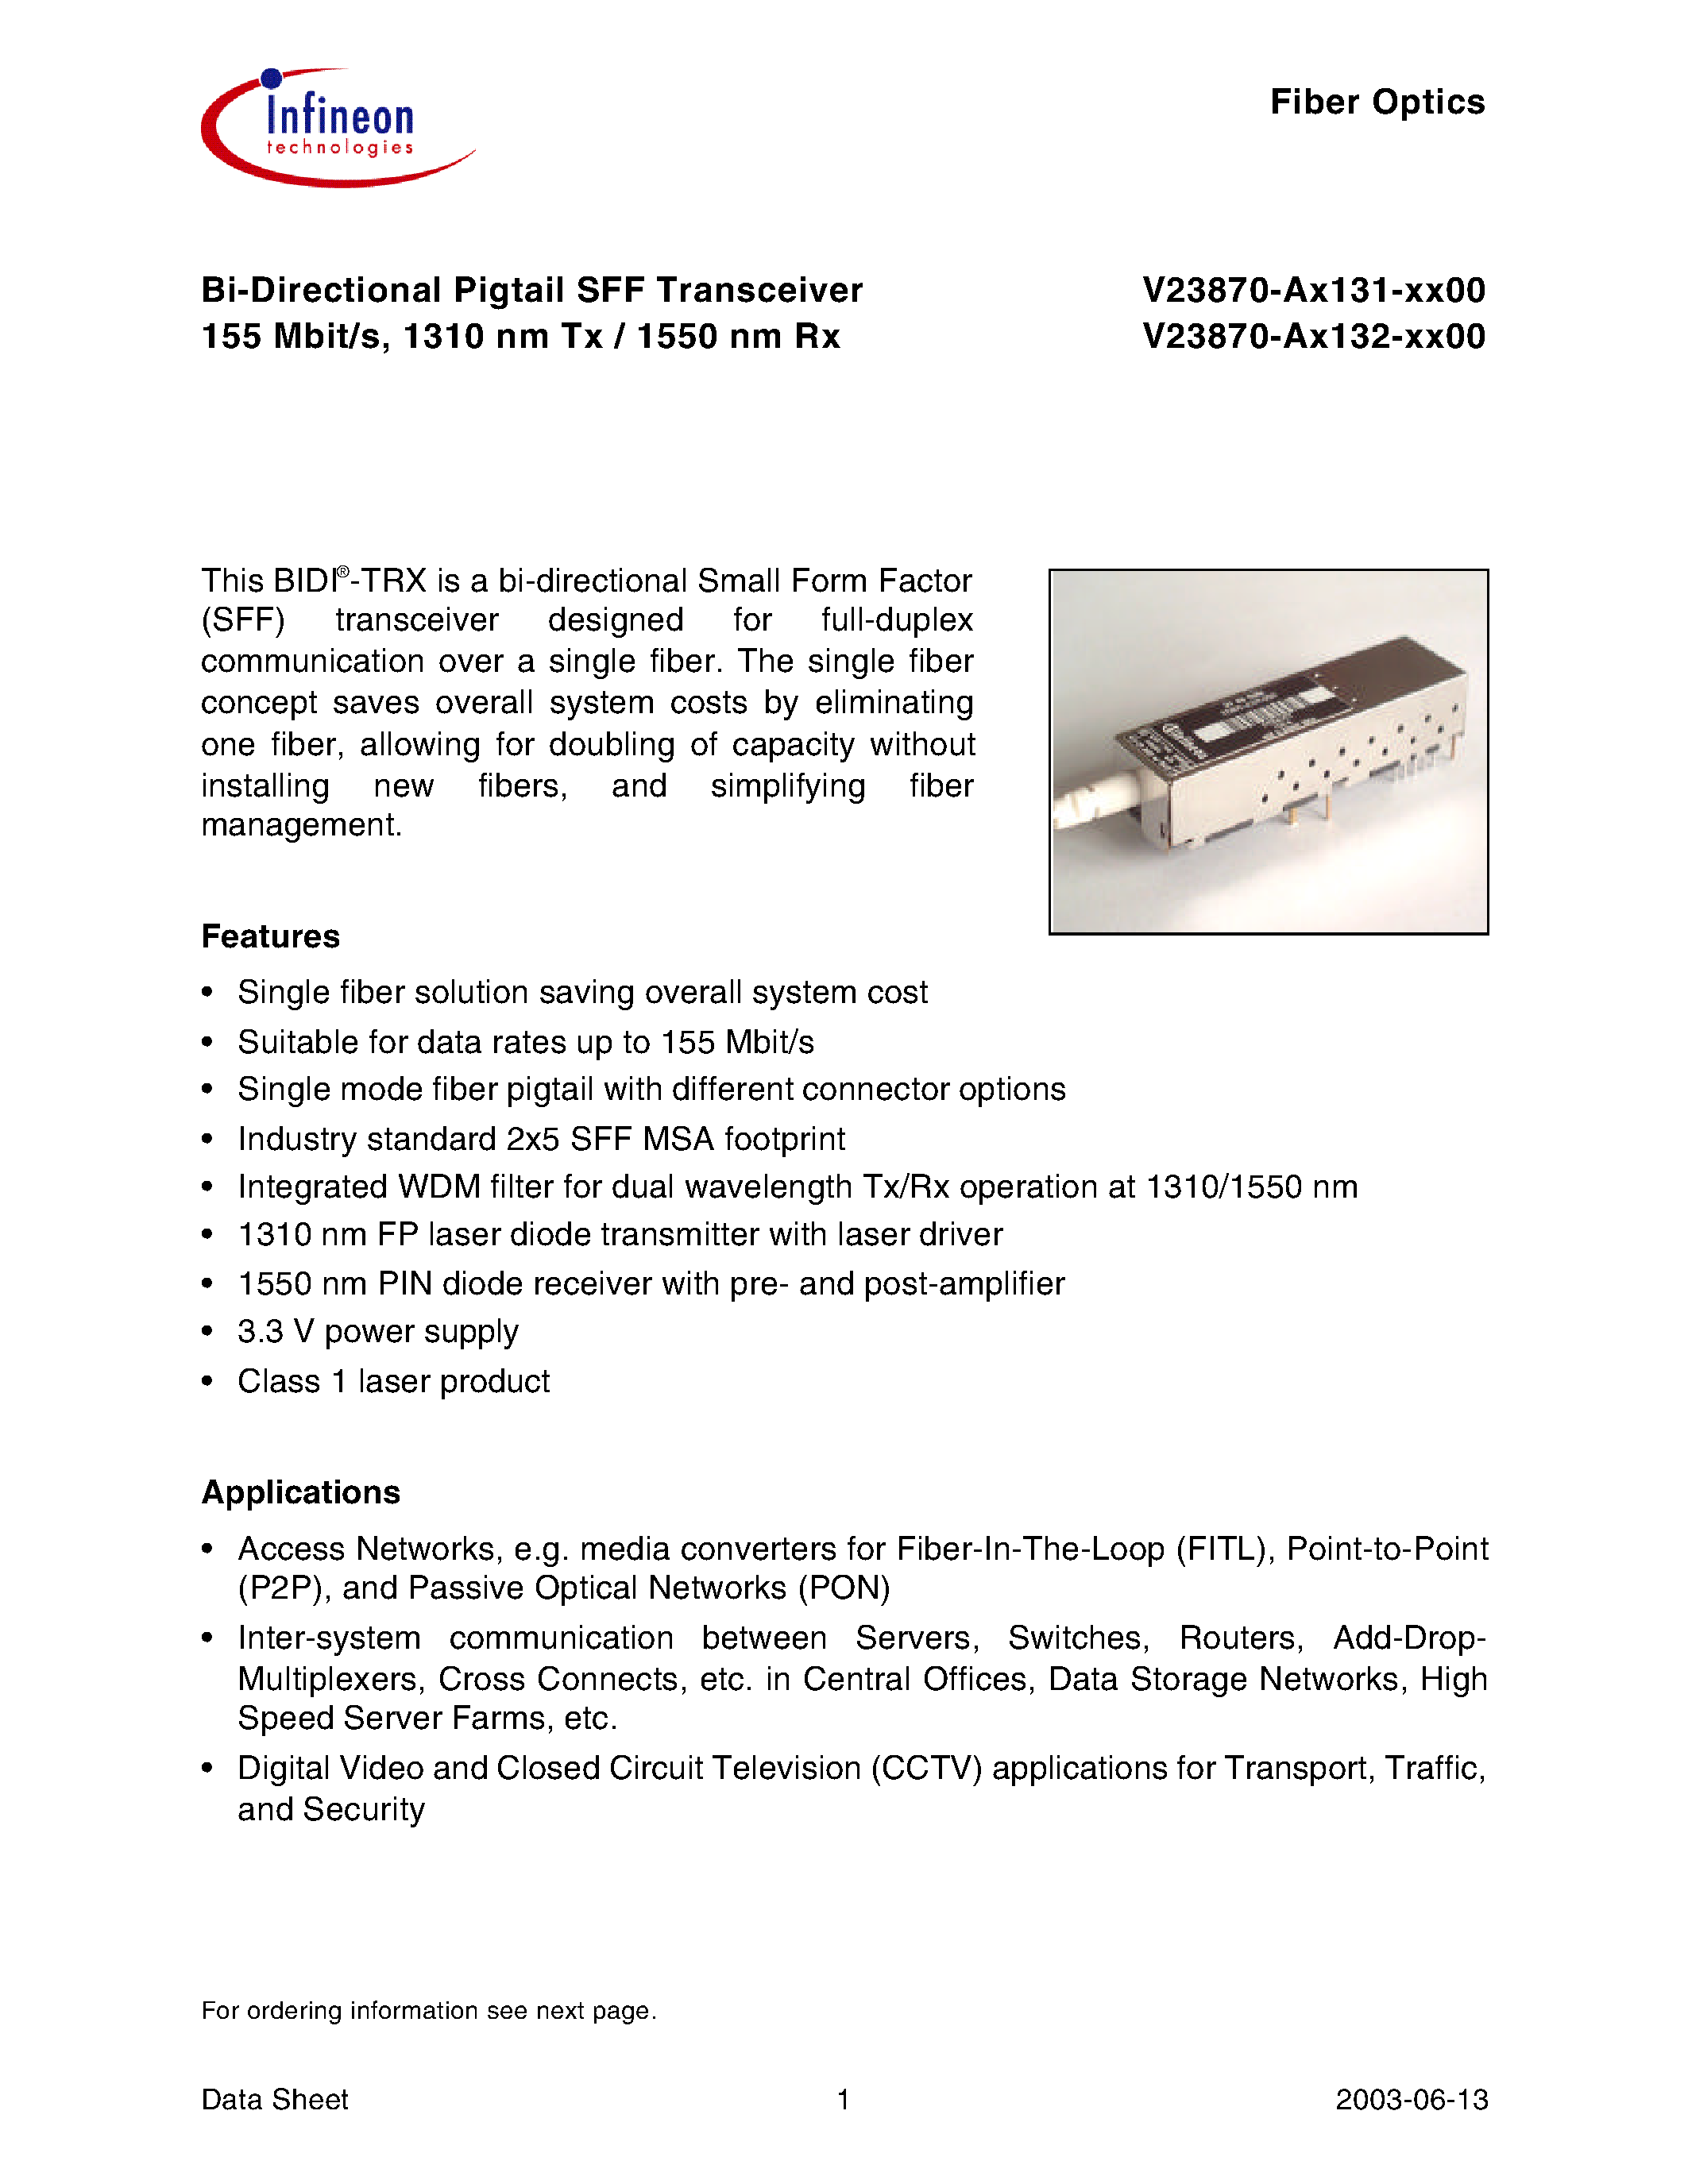 Datasheet V23870-A1132-K100 - Bi-Directional Pigtail SFF Transceiver 155 Mbit/s/ 1310 nm Tx / 1550 nm Rx page 1